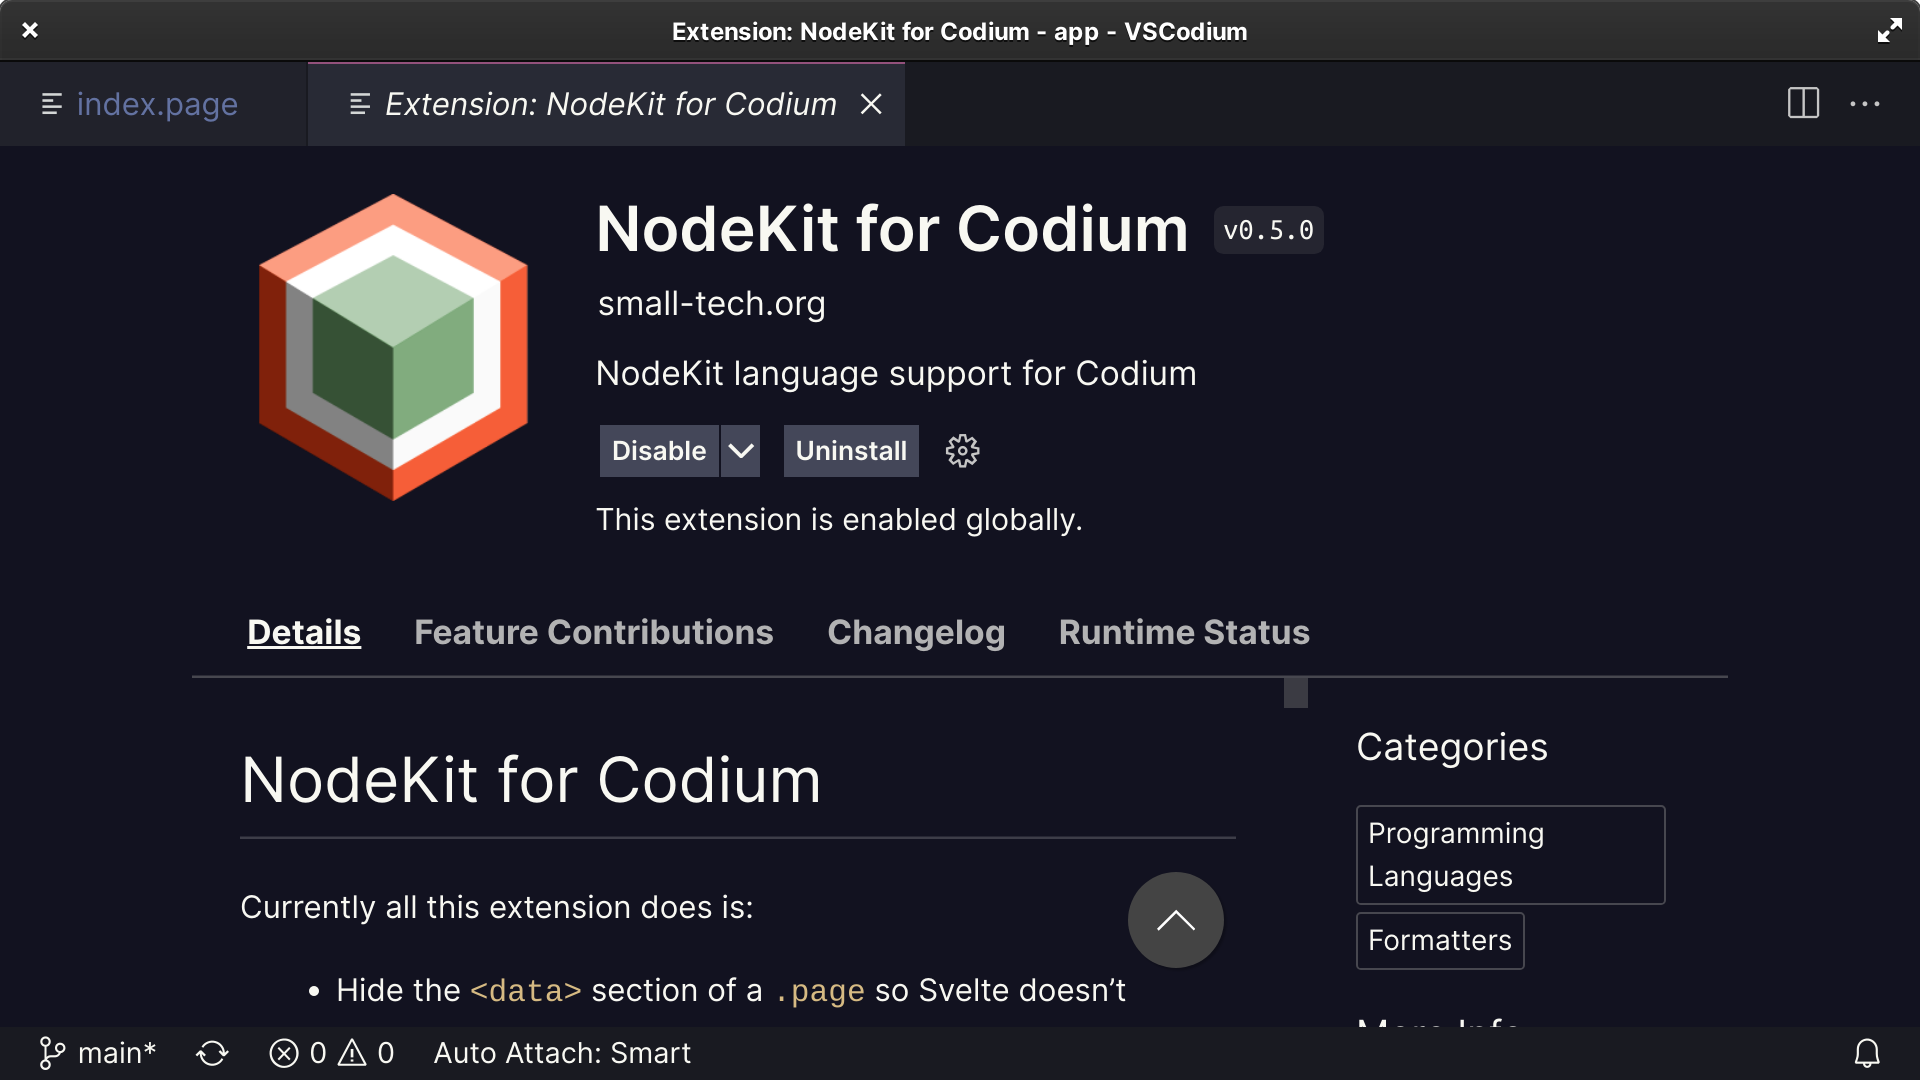 Screenshot of the NodeKit for Codium extension’s settings page in VSCodium.